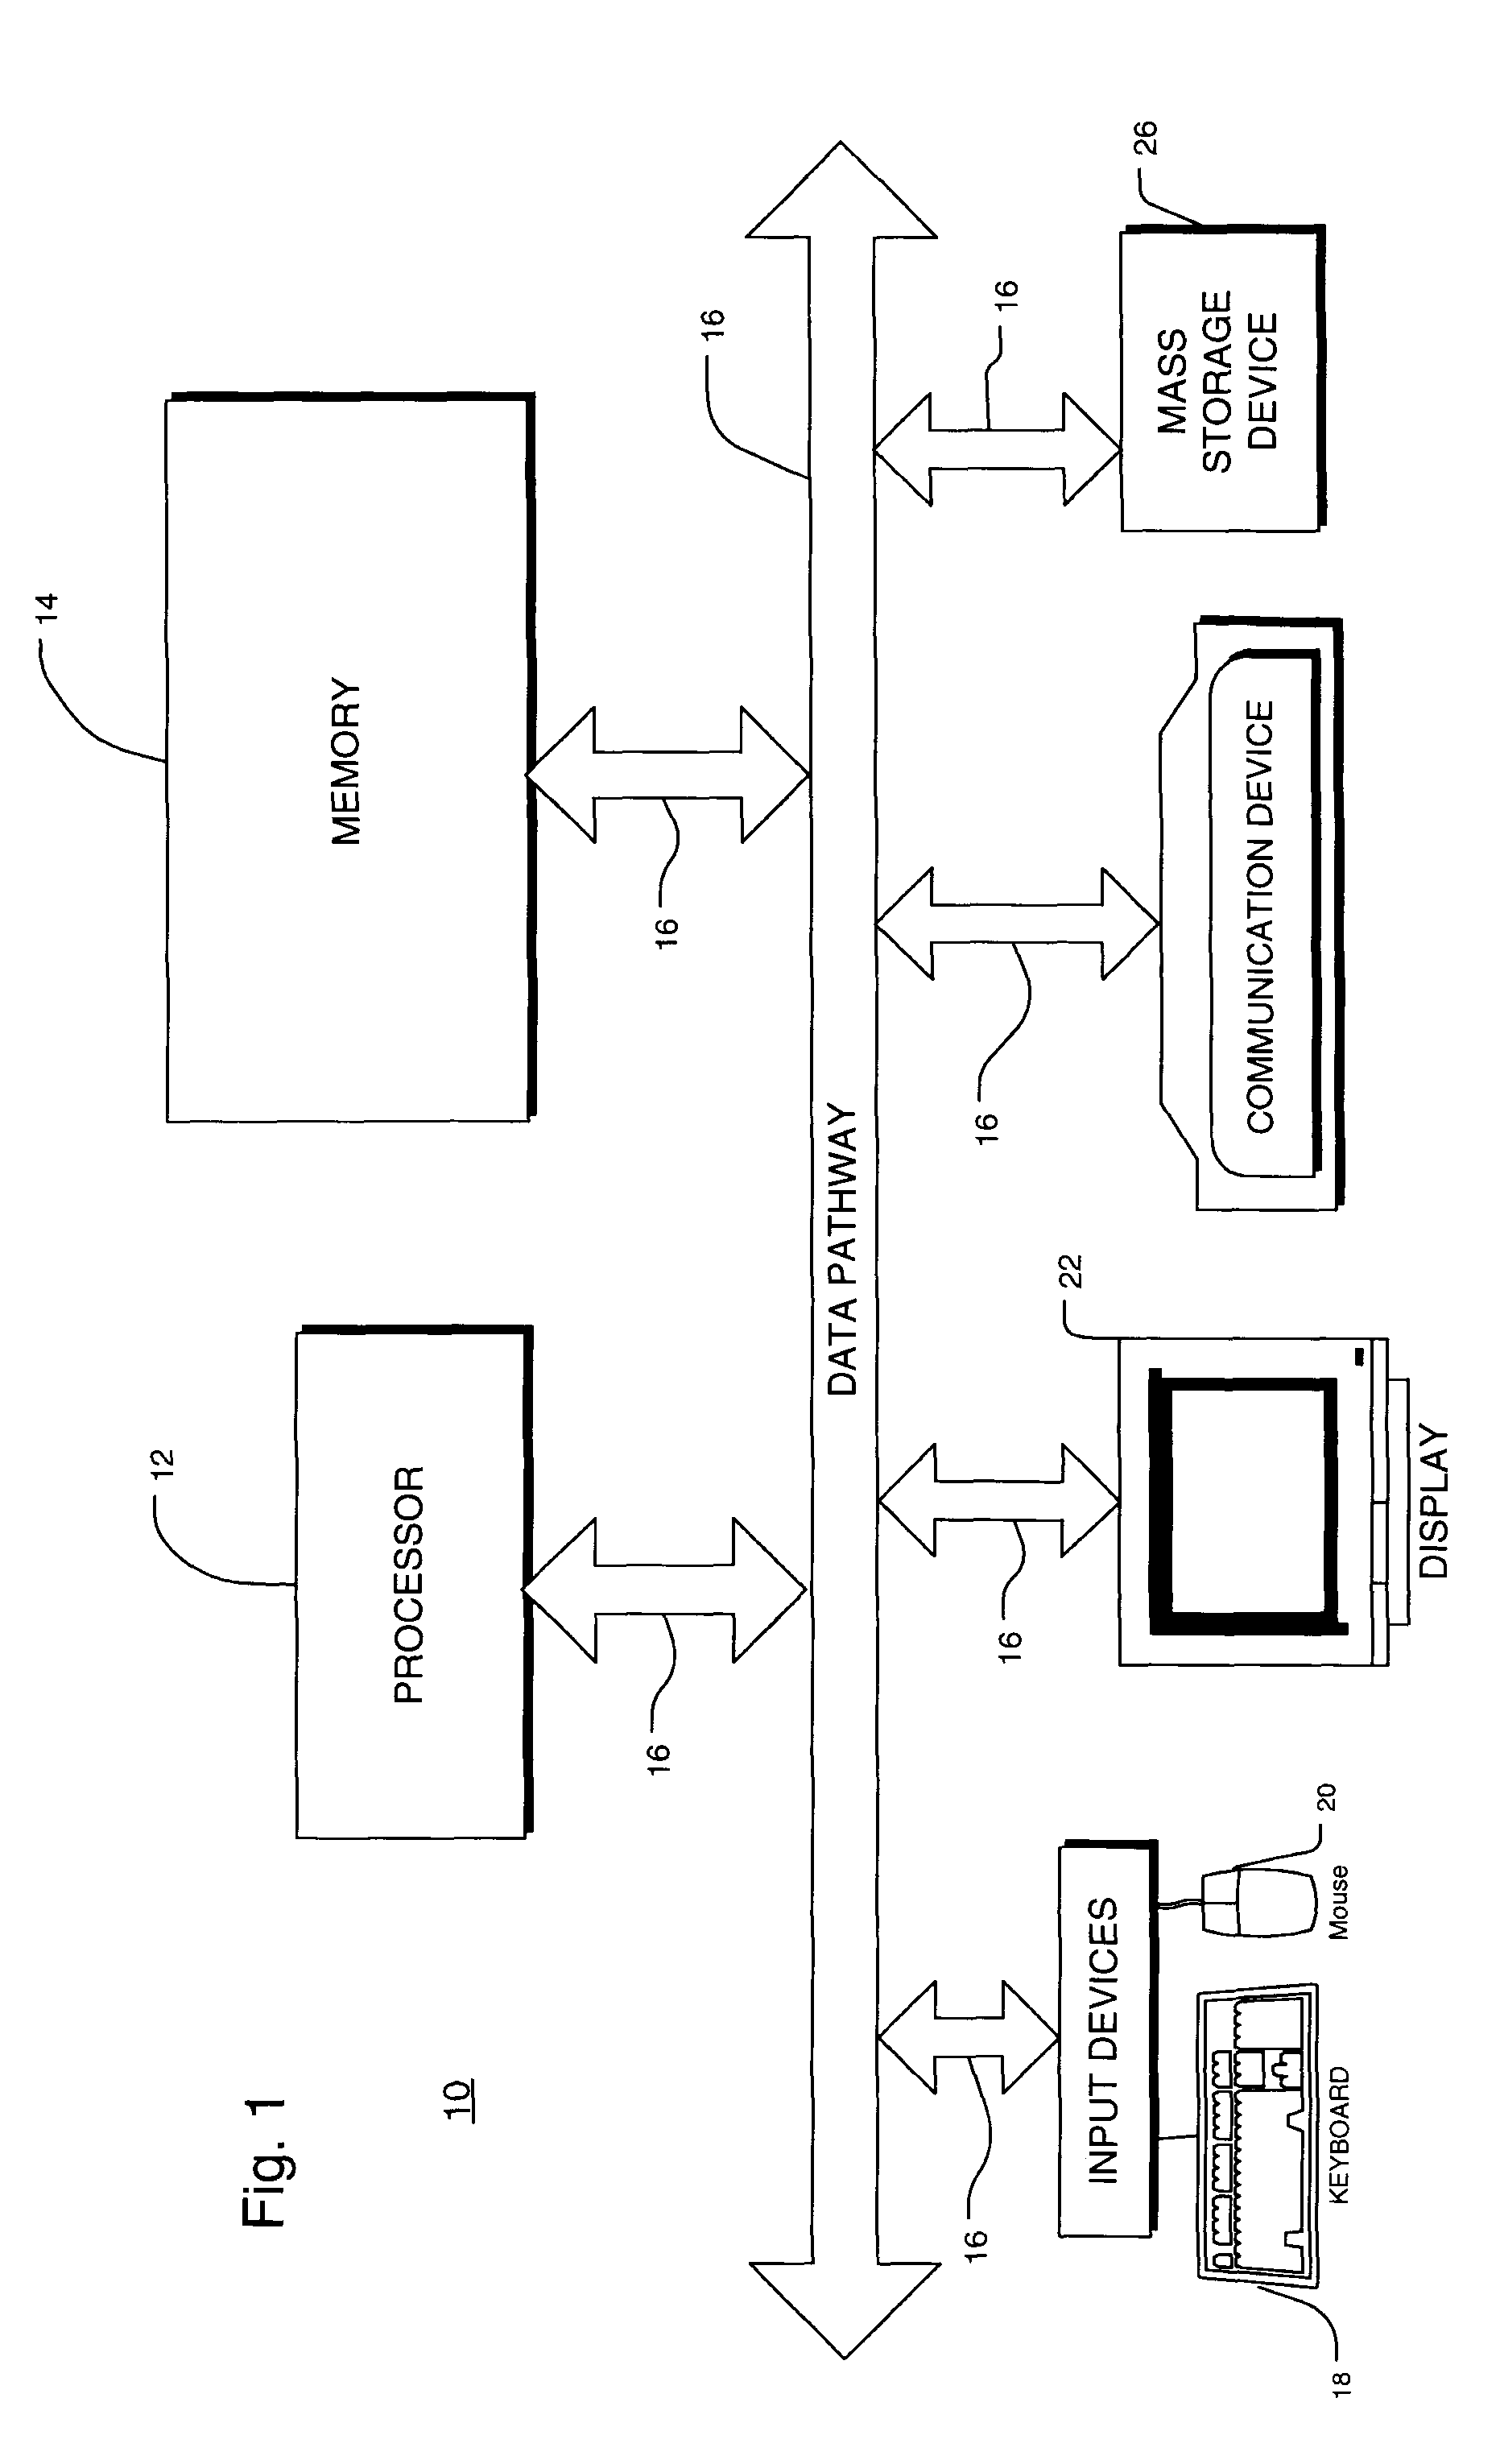 System and method for improving accuracy of baseline models